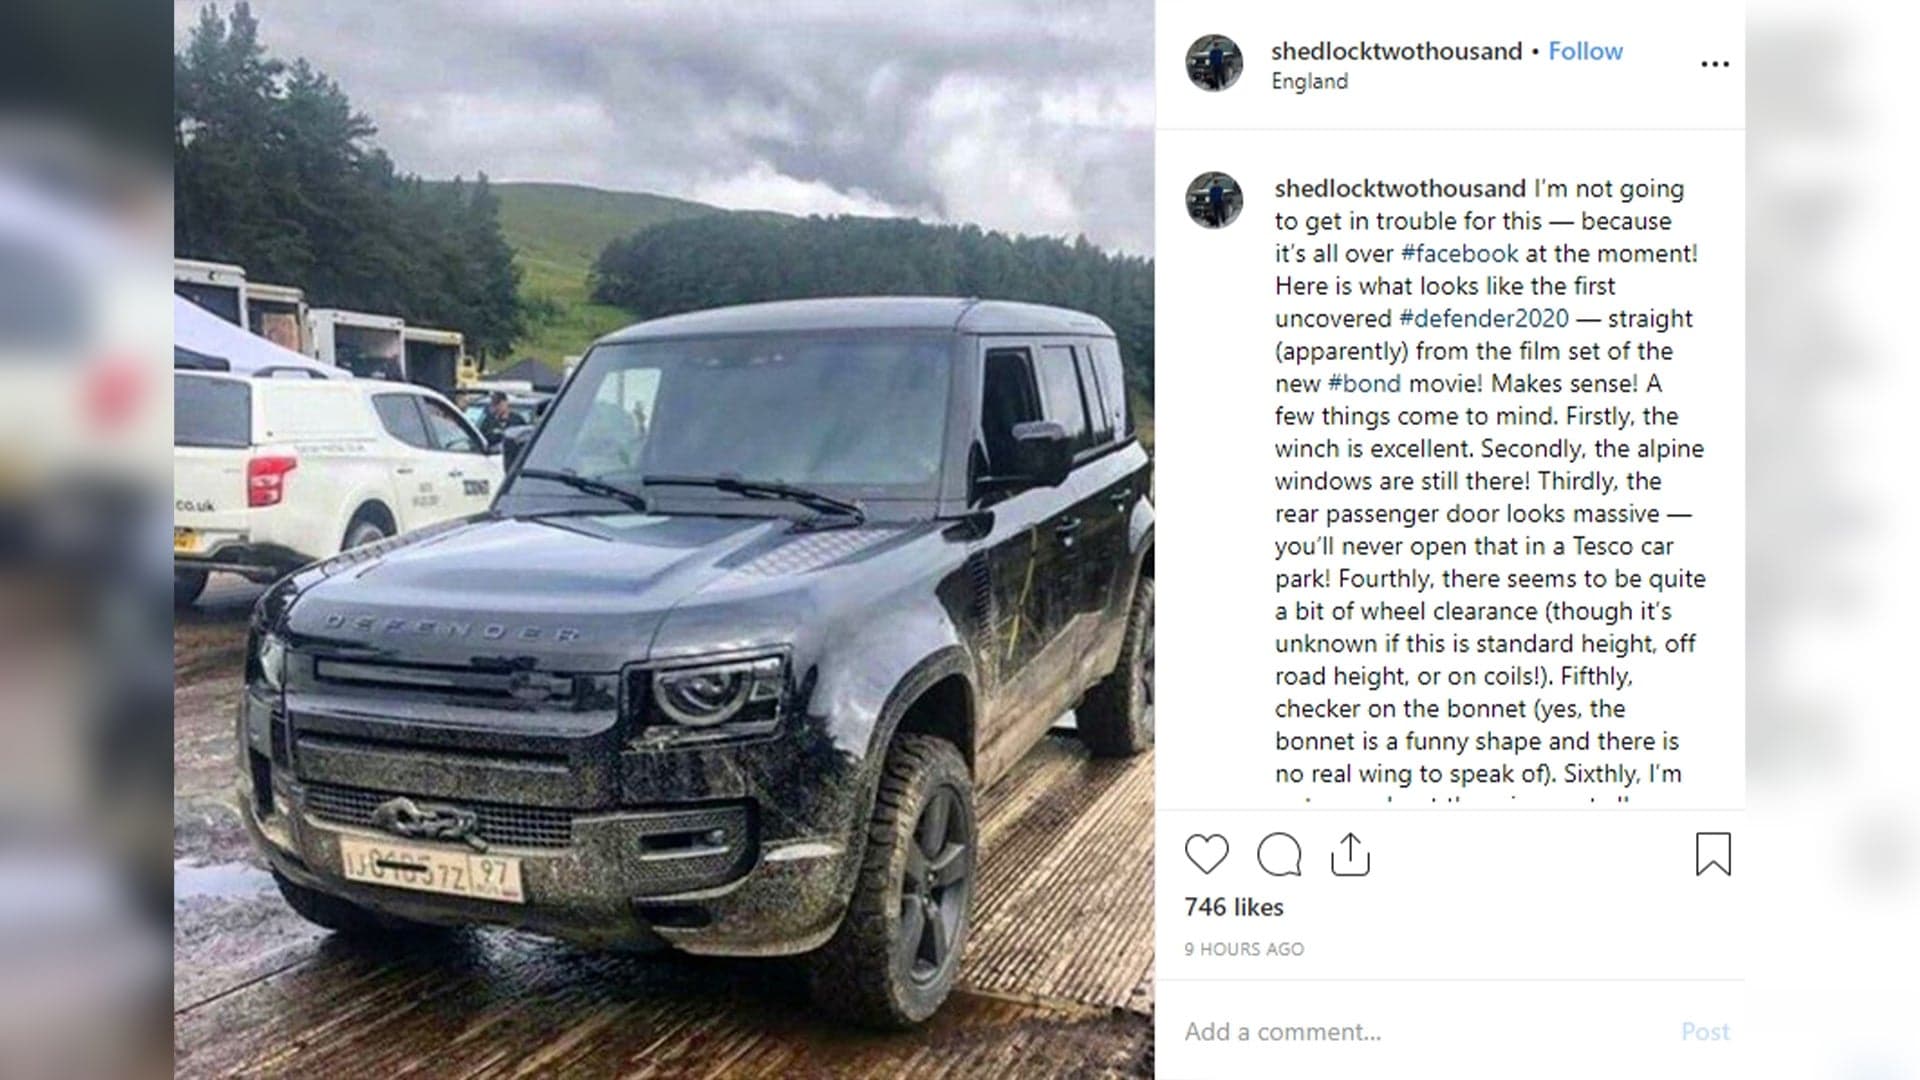 Undisguised 2020 Land Rover Defender Spotted on James Bond Film Set: Report